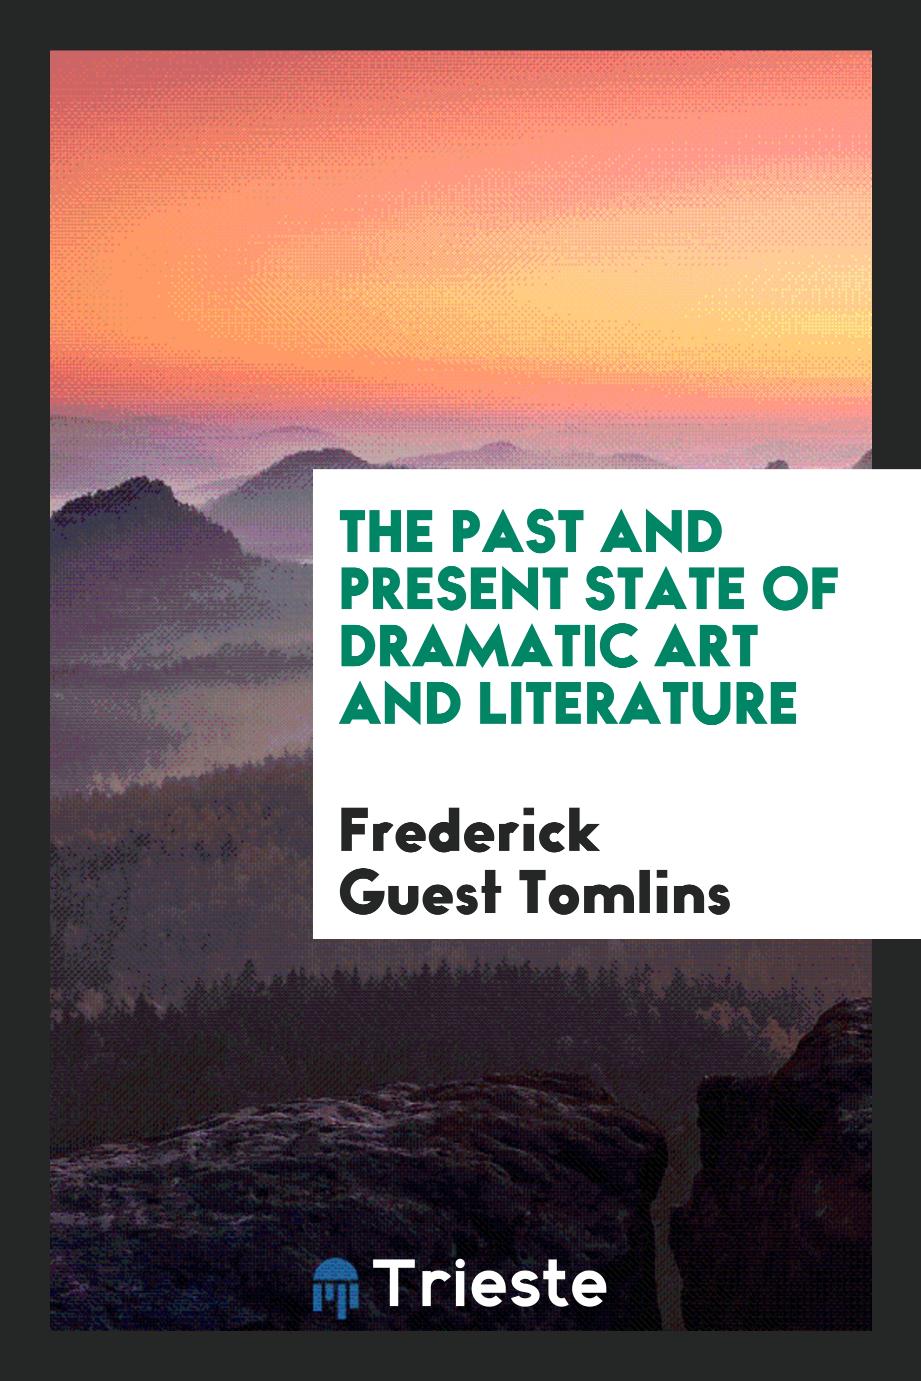 The past and present state of dramatic art and literature